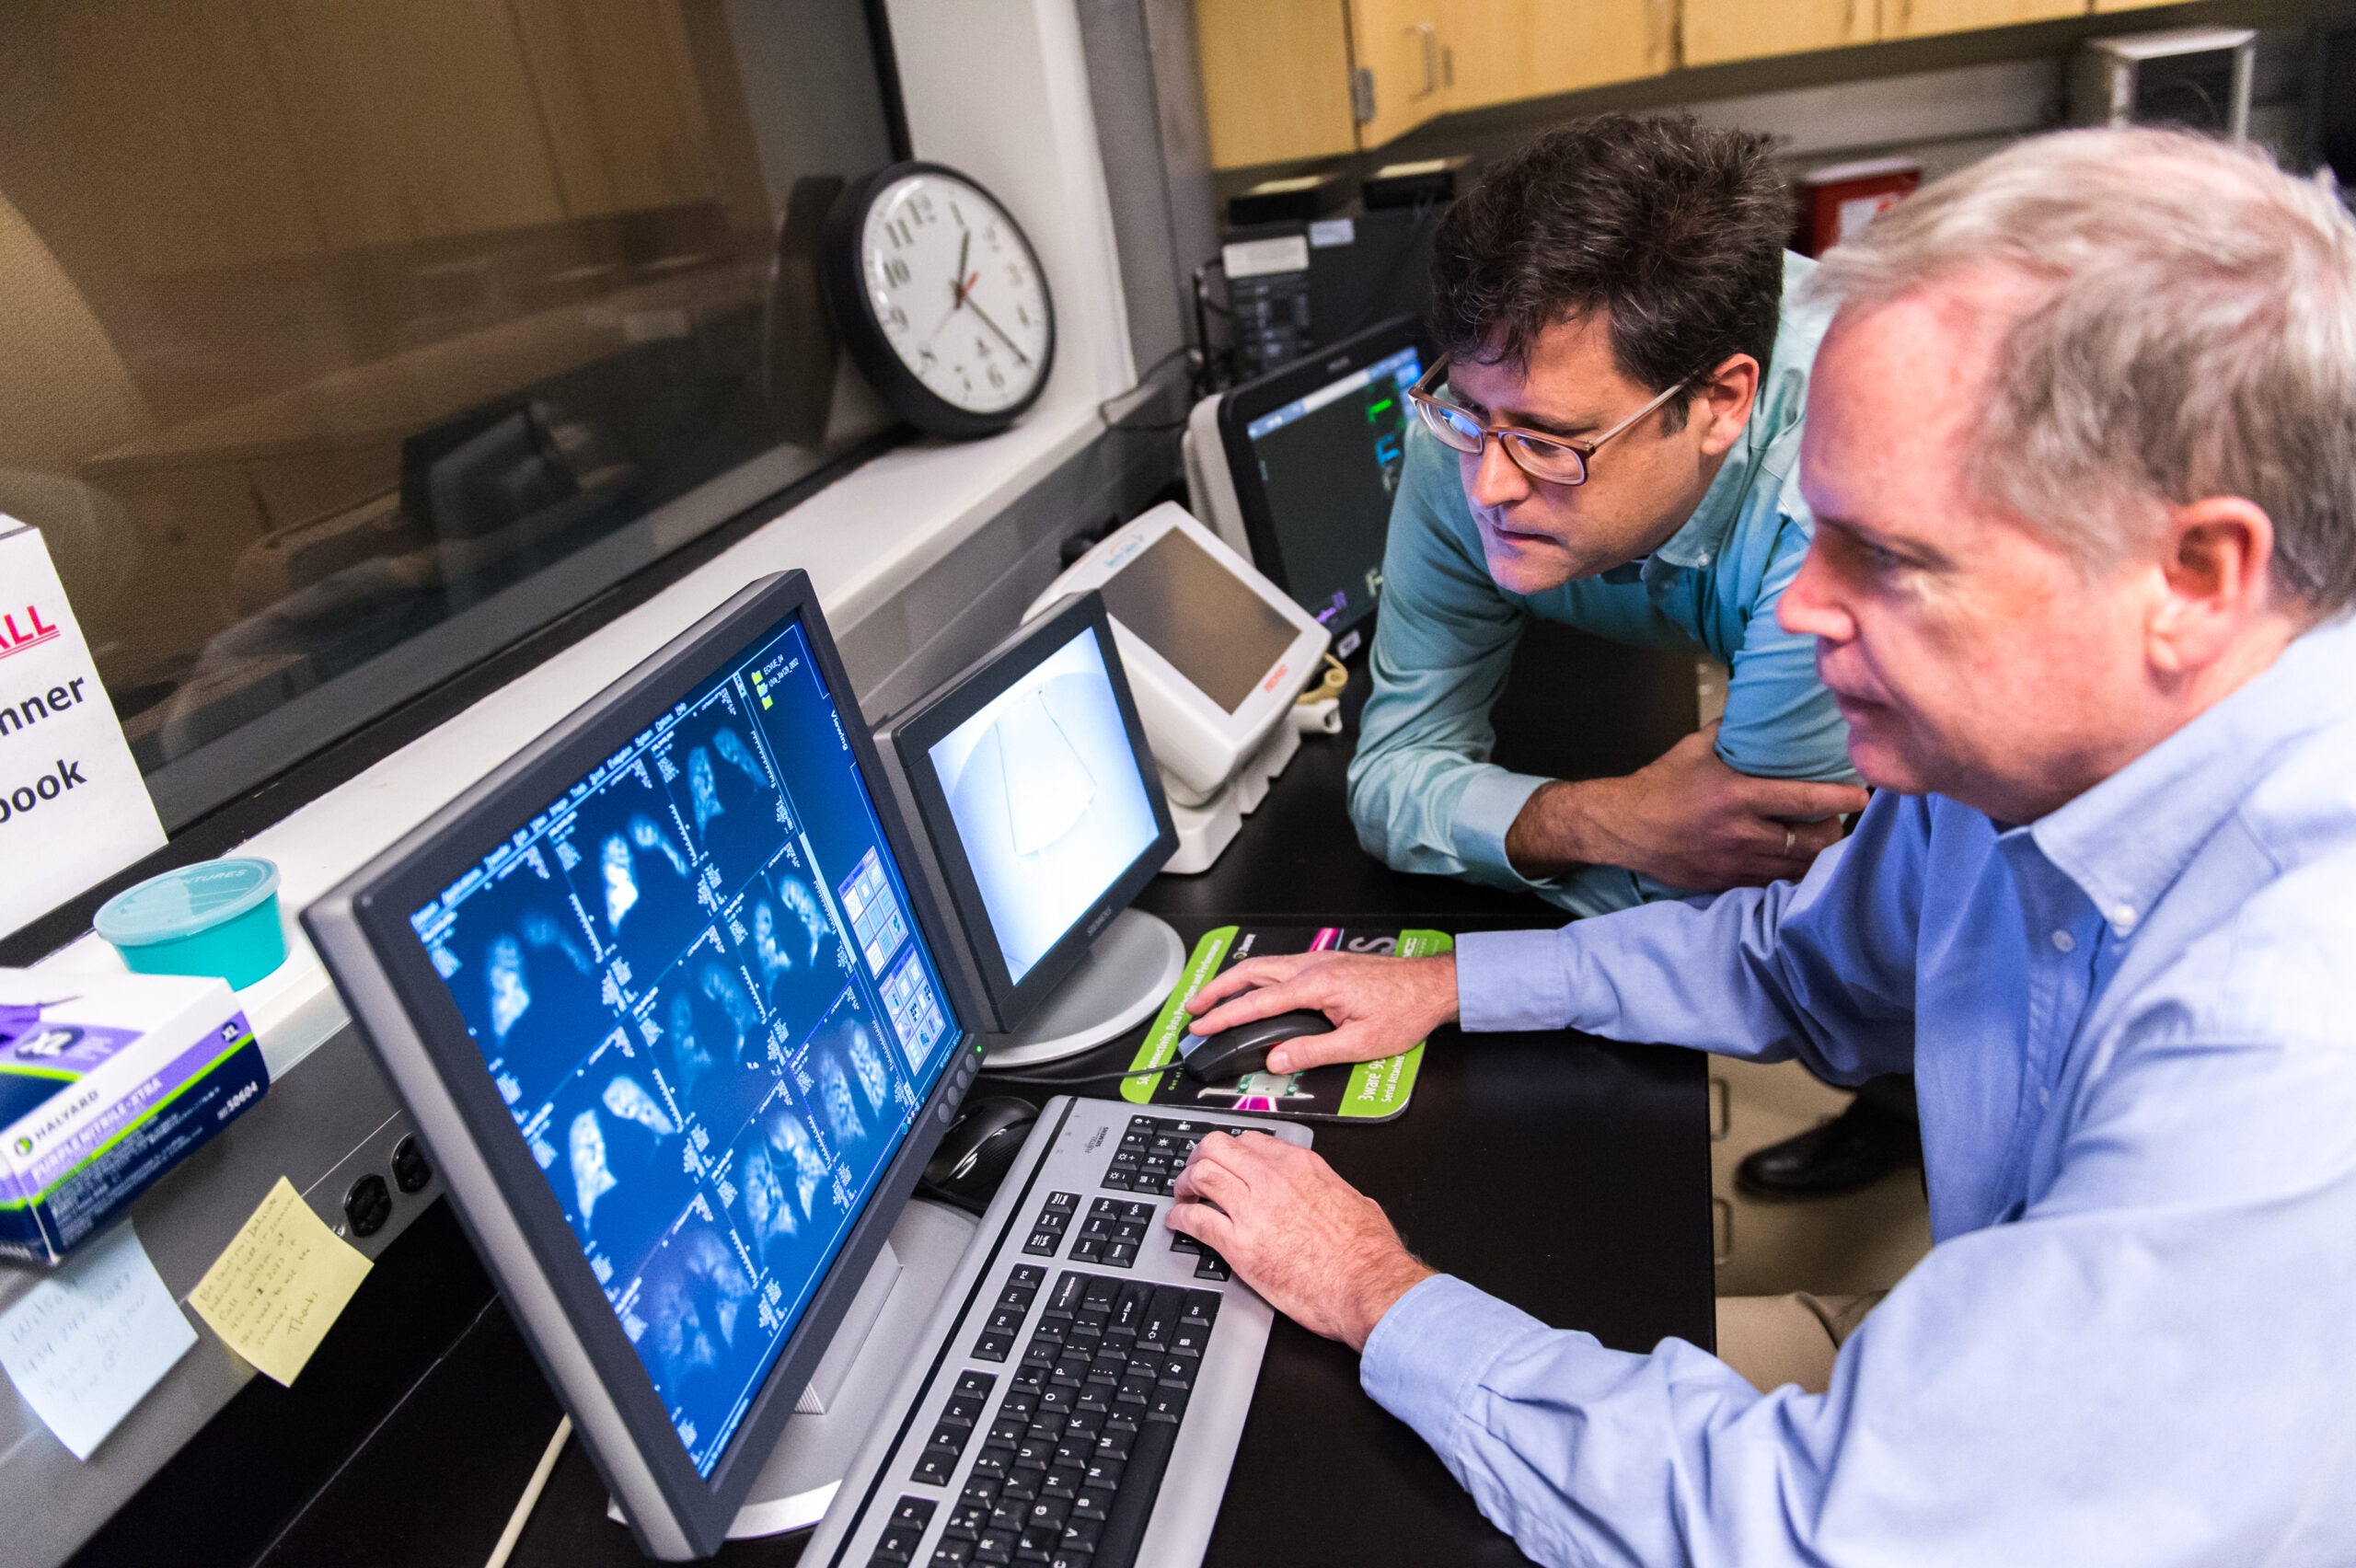 uva radiologists collaborate to analyze patient scans